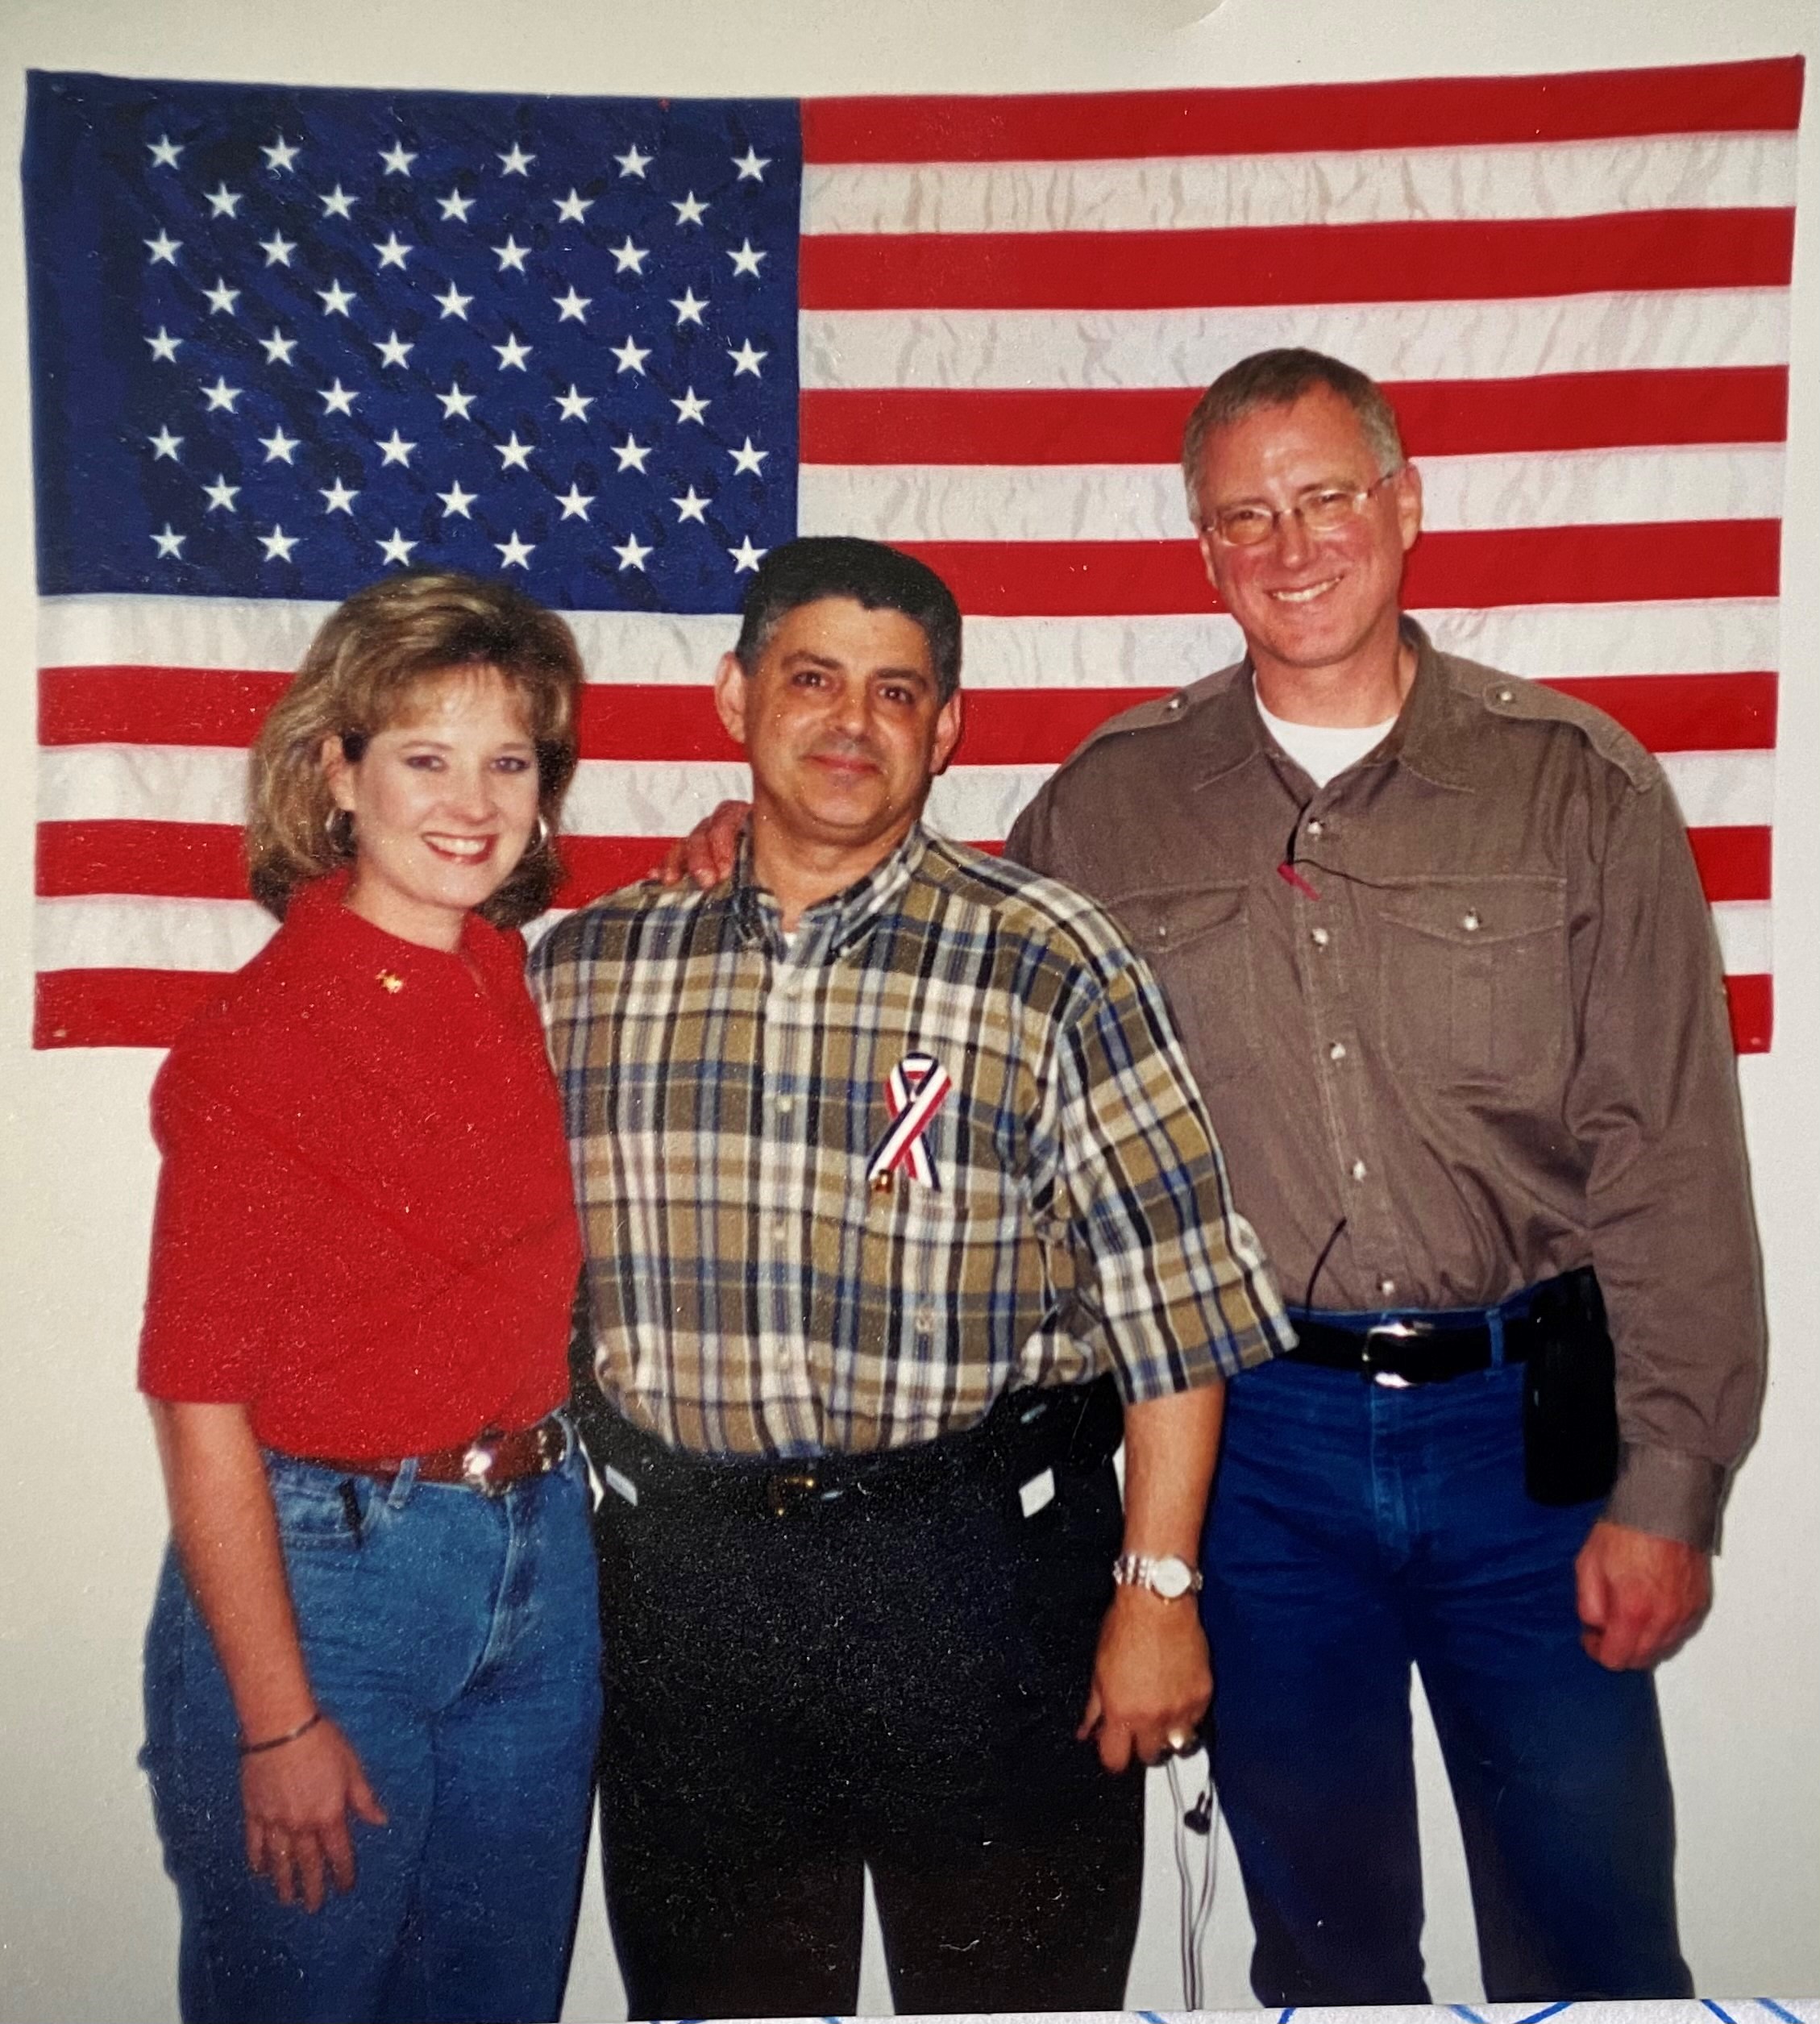 Sept. 14, 2001. Robert A. (Bob) Weaver (middle), U.S. Secret Service Agent from New York asked Lisa Nine (left) to hang up the American Flag when they first opened the re-located office from World Trade Center 7 to the John Jay College of Criminal Justice in New York City. 